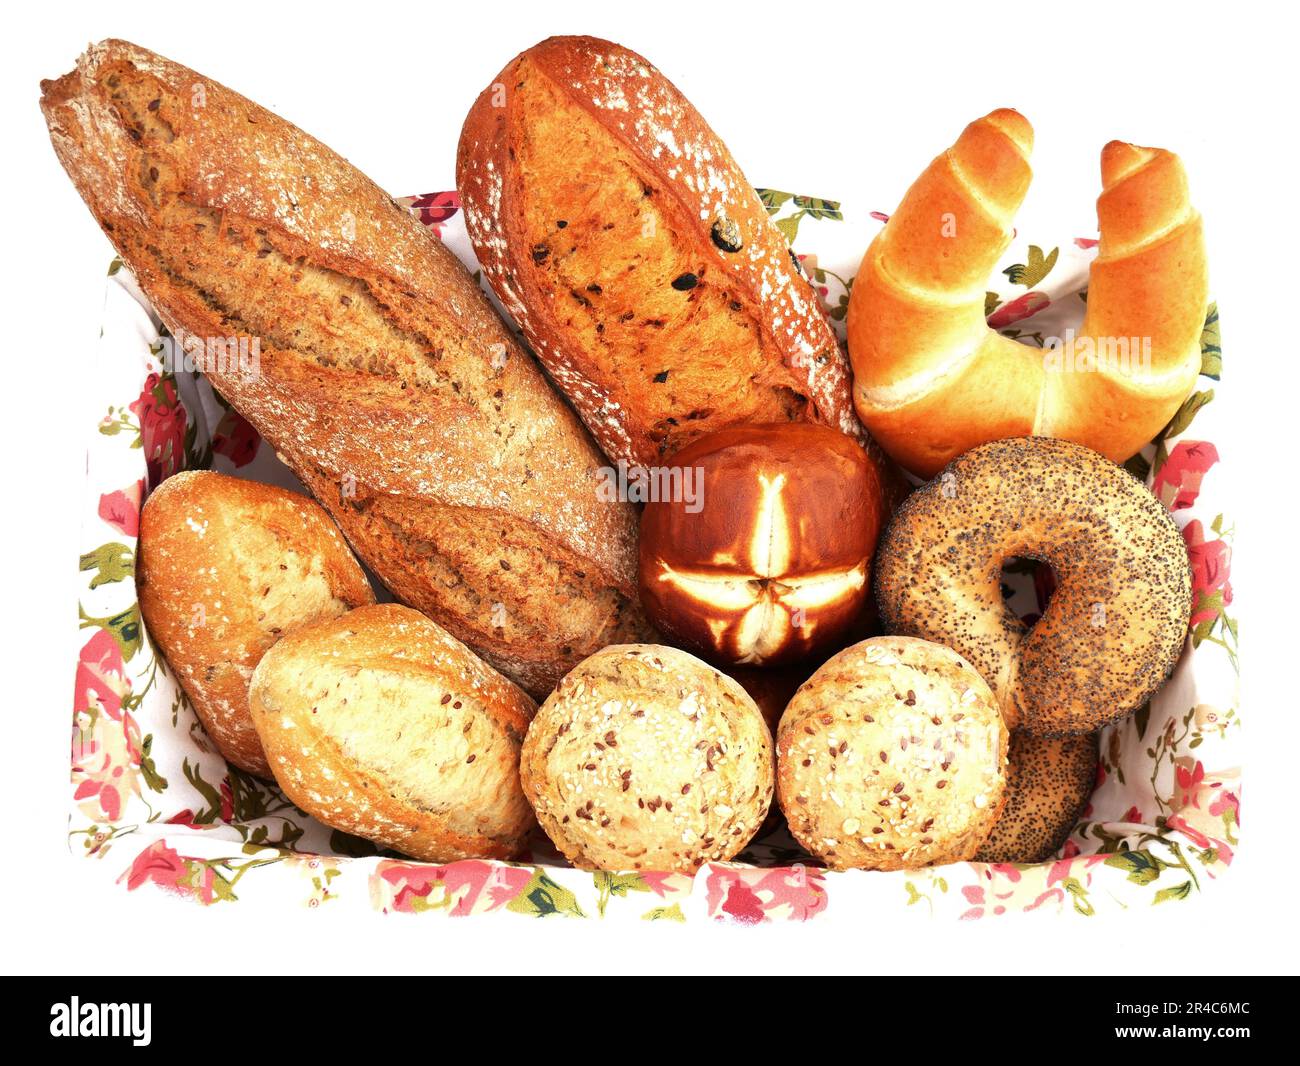 Basket of fresh and crispy bread from natural ingredients enriched with cereal grains. Stock Photo